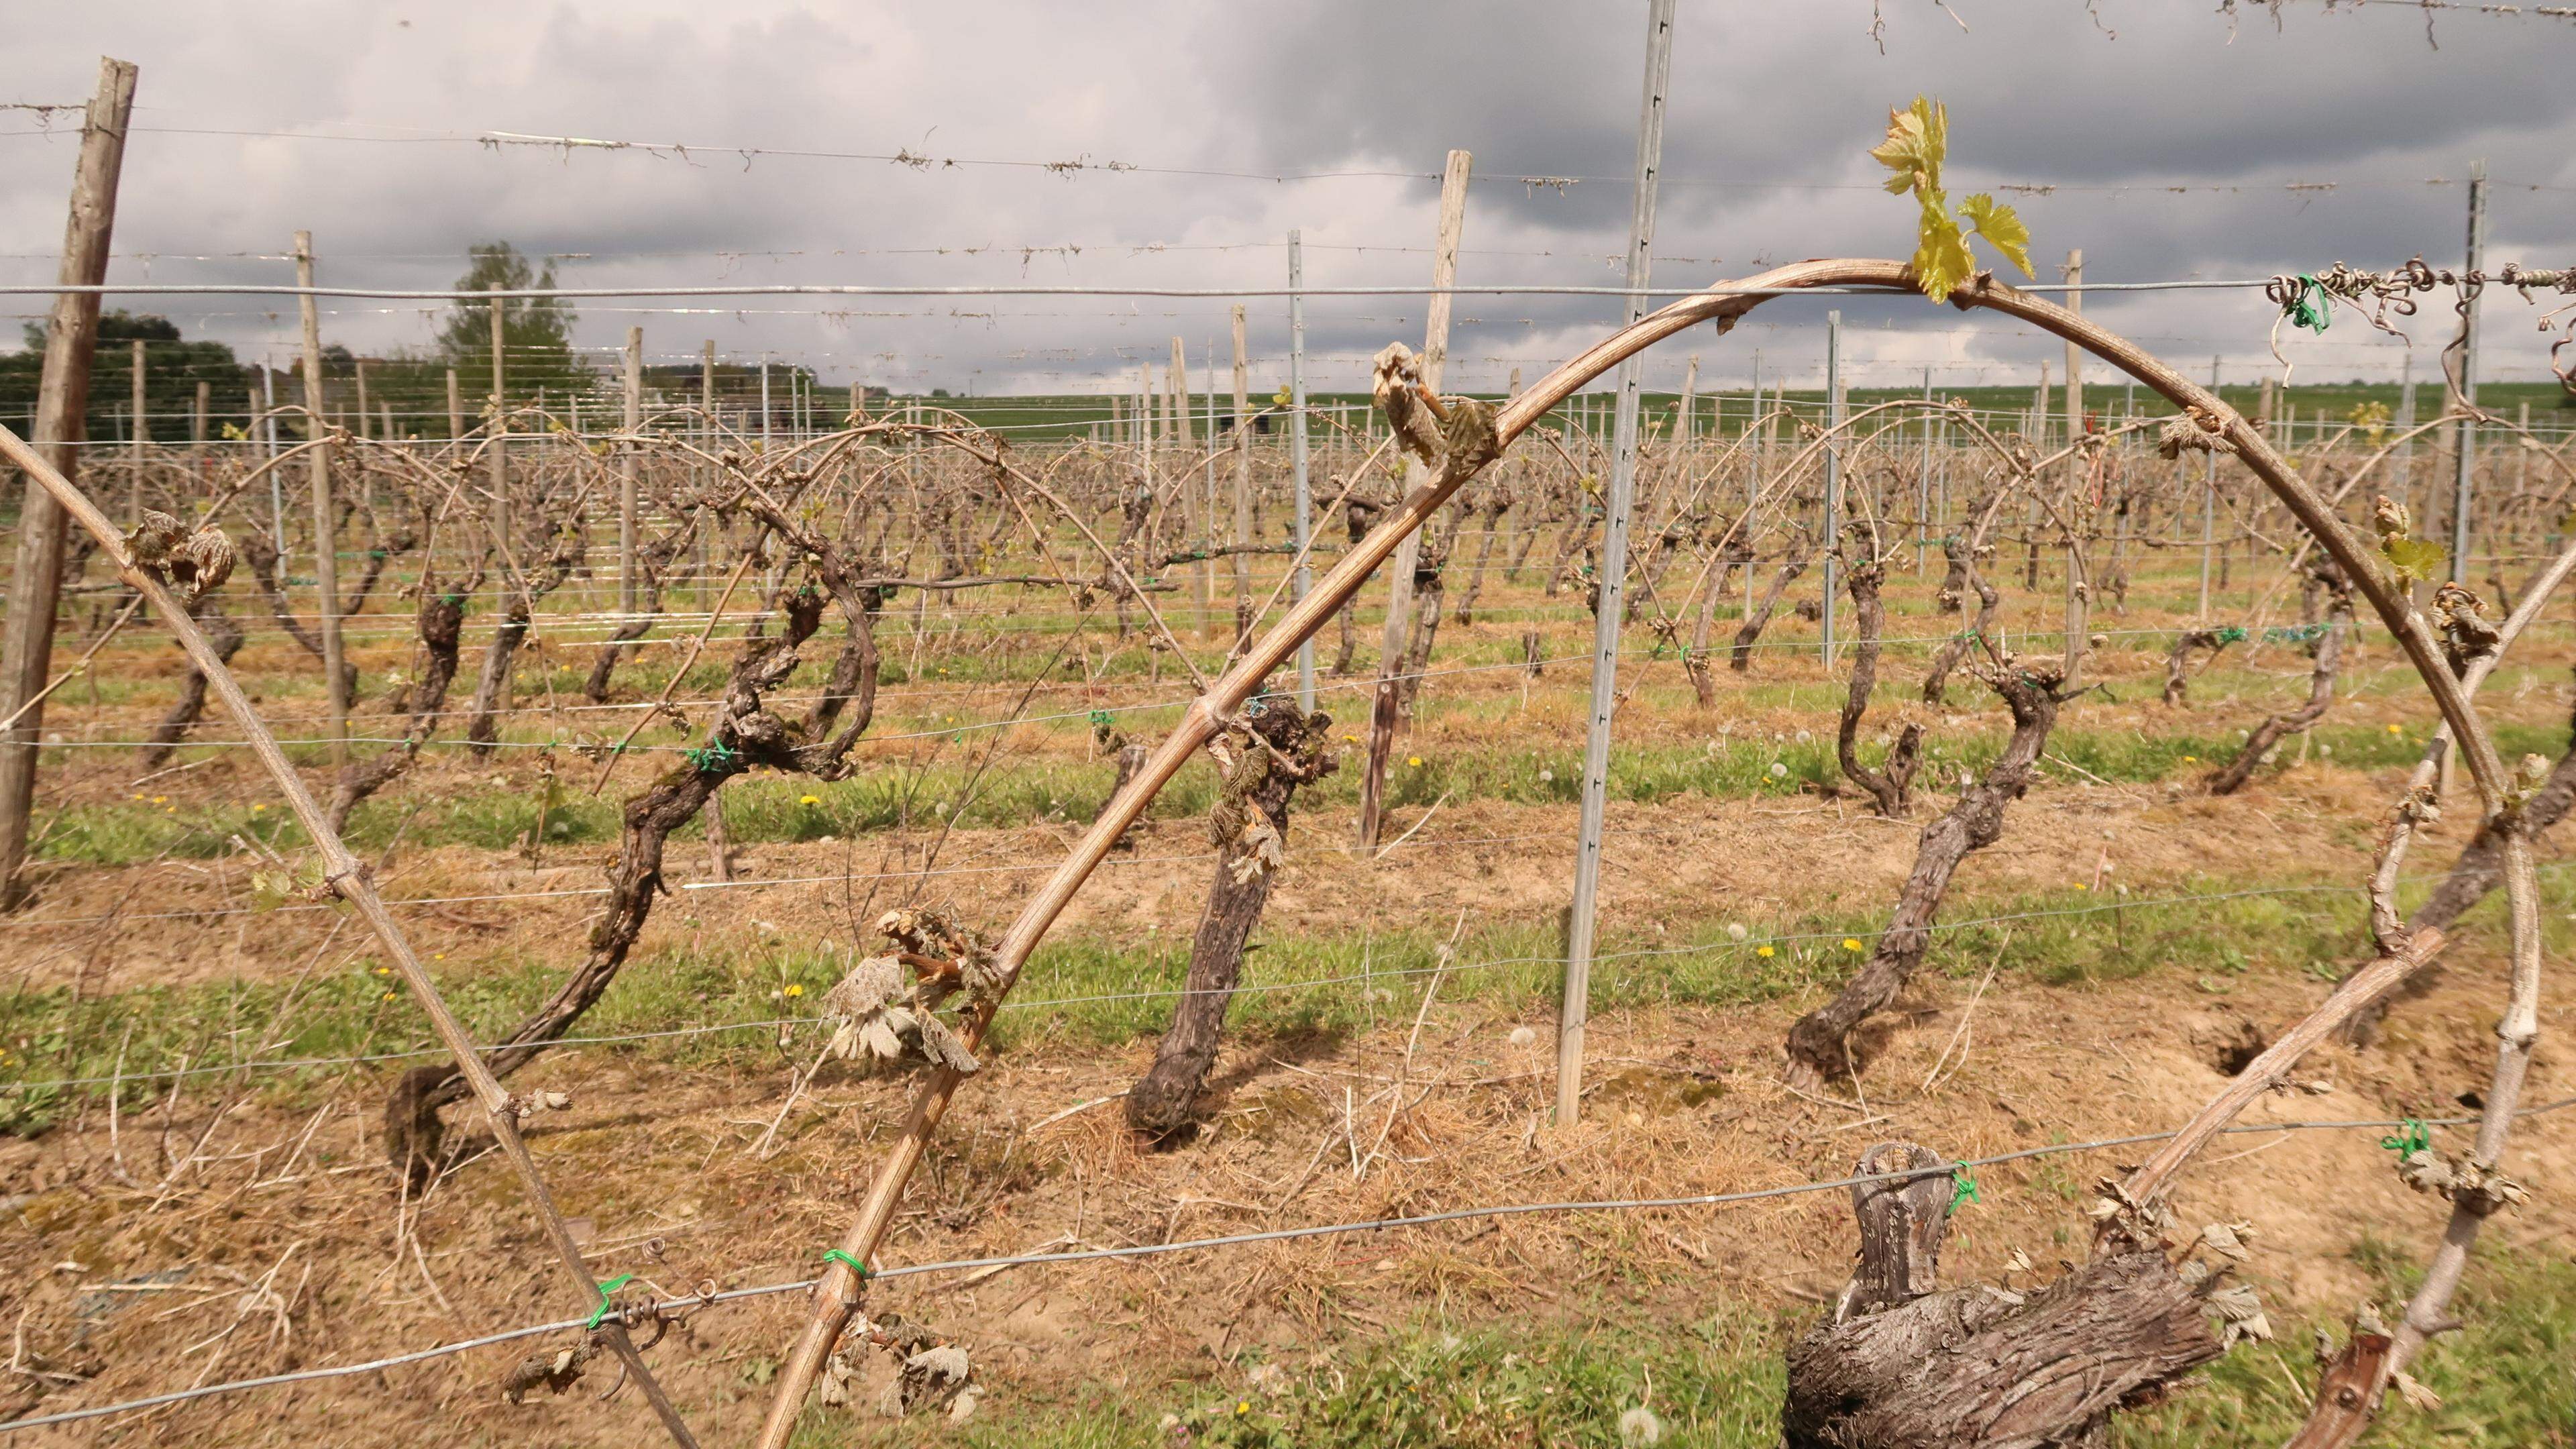 Though vines can recover from frost waves, harvests will be less bountiful this year.